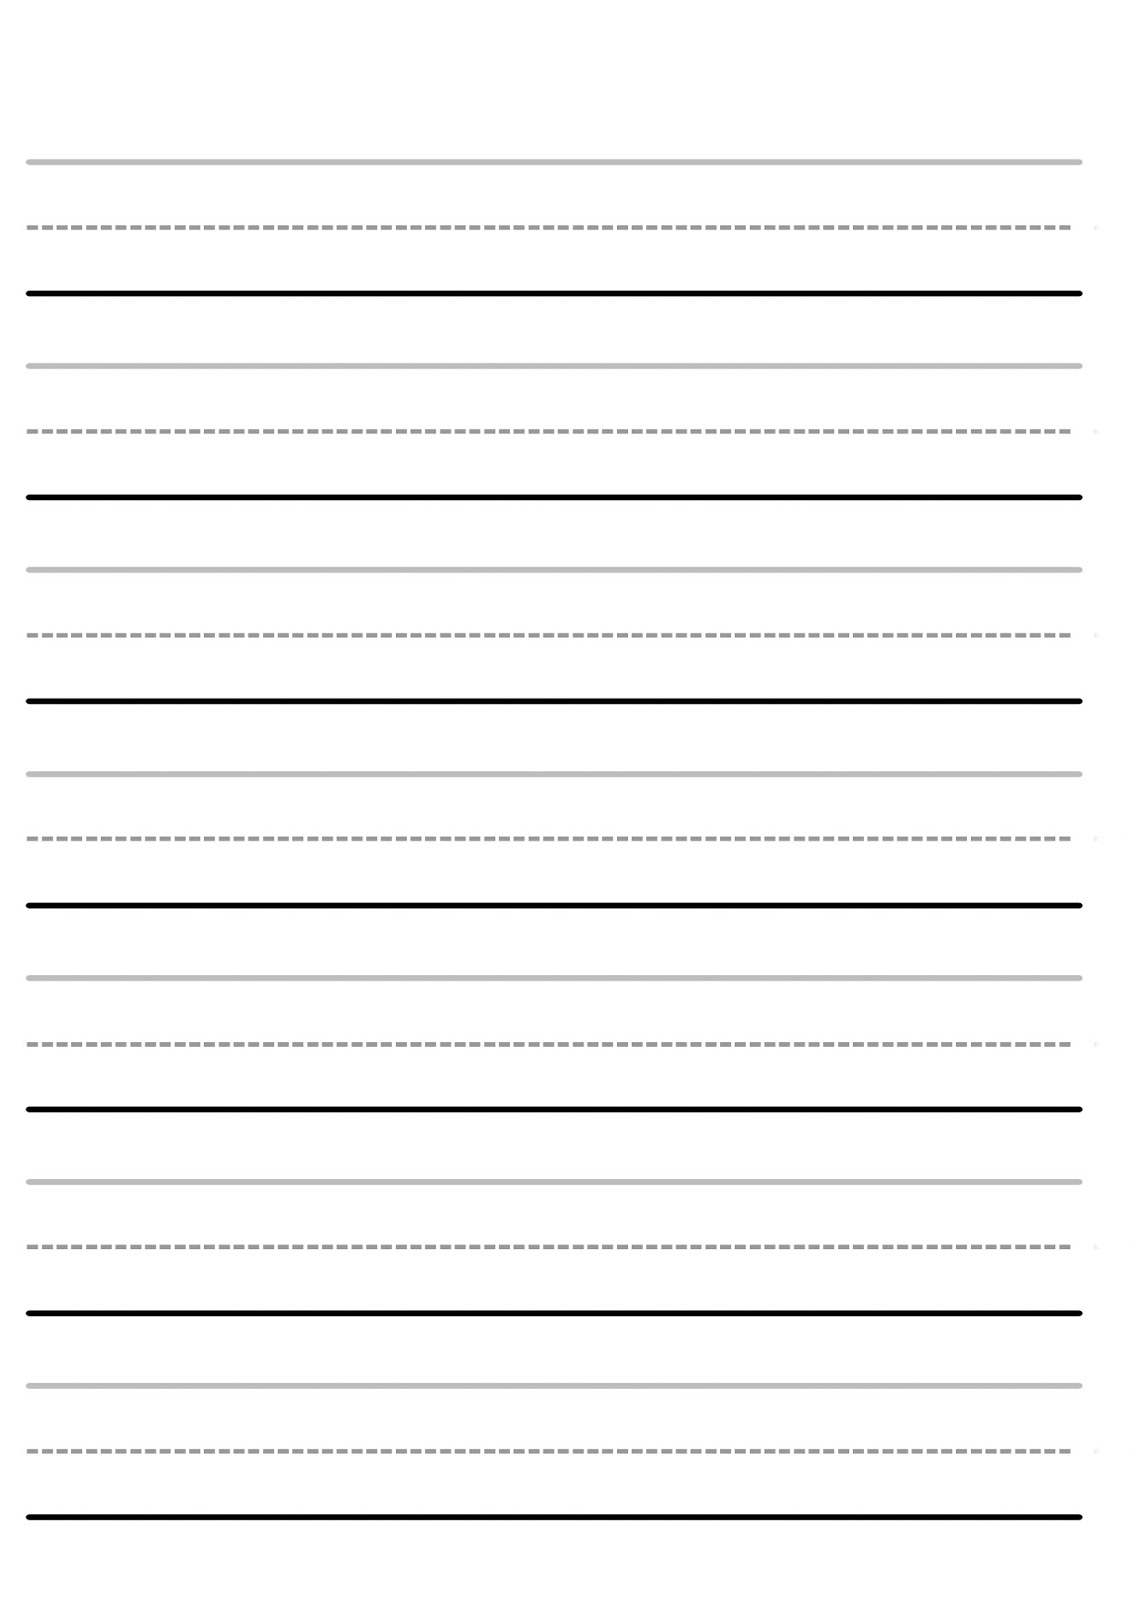 Blank Letter Tracing Worksheets